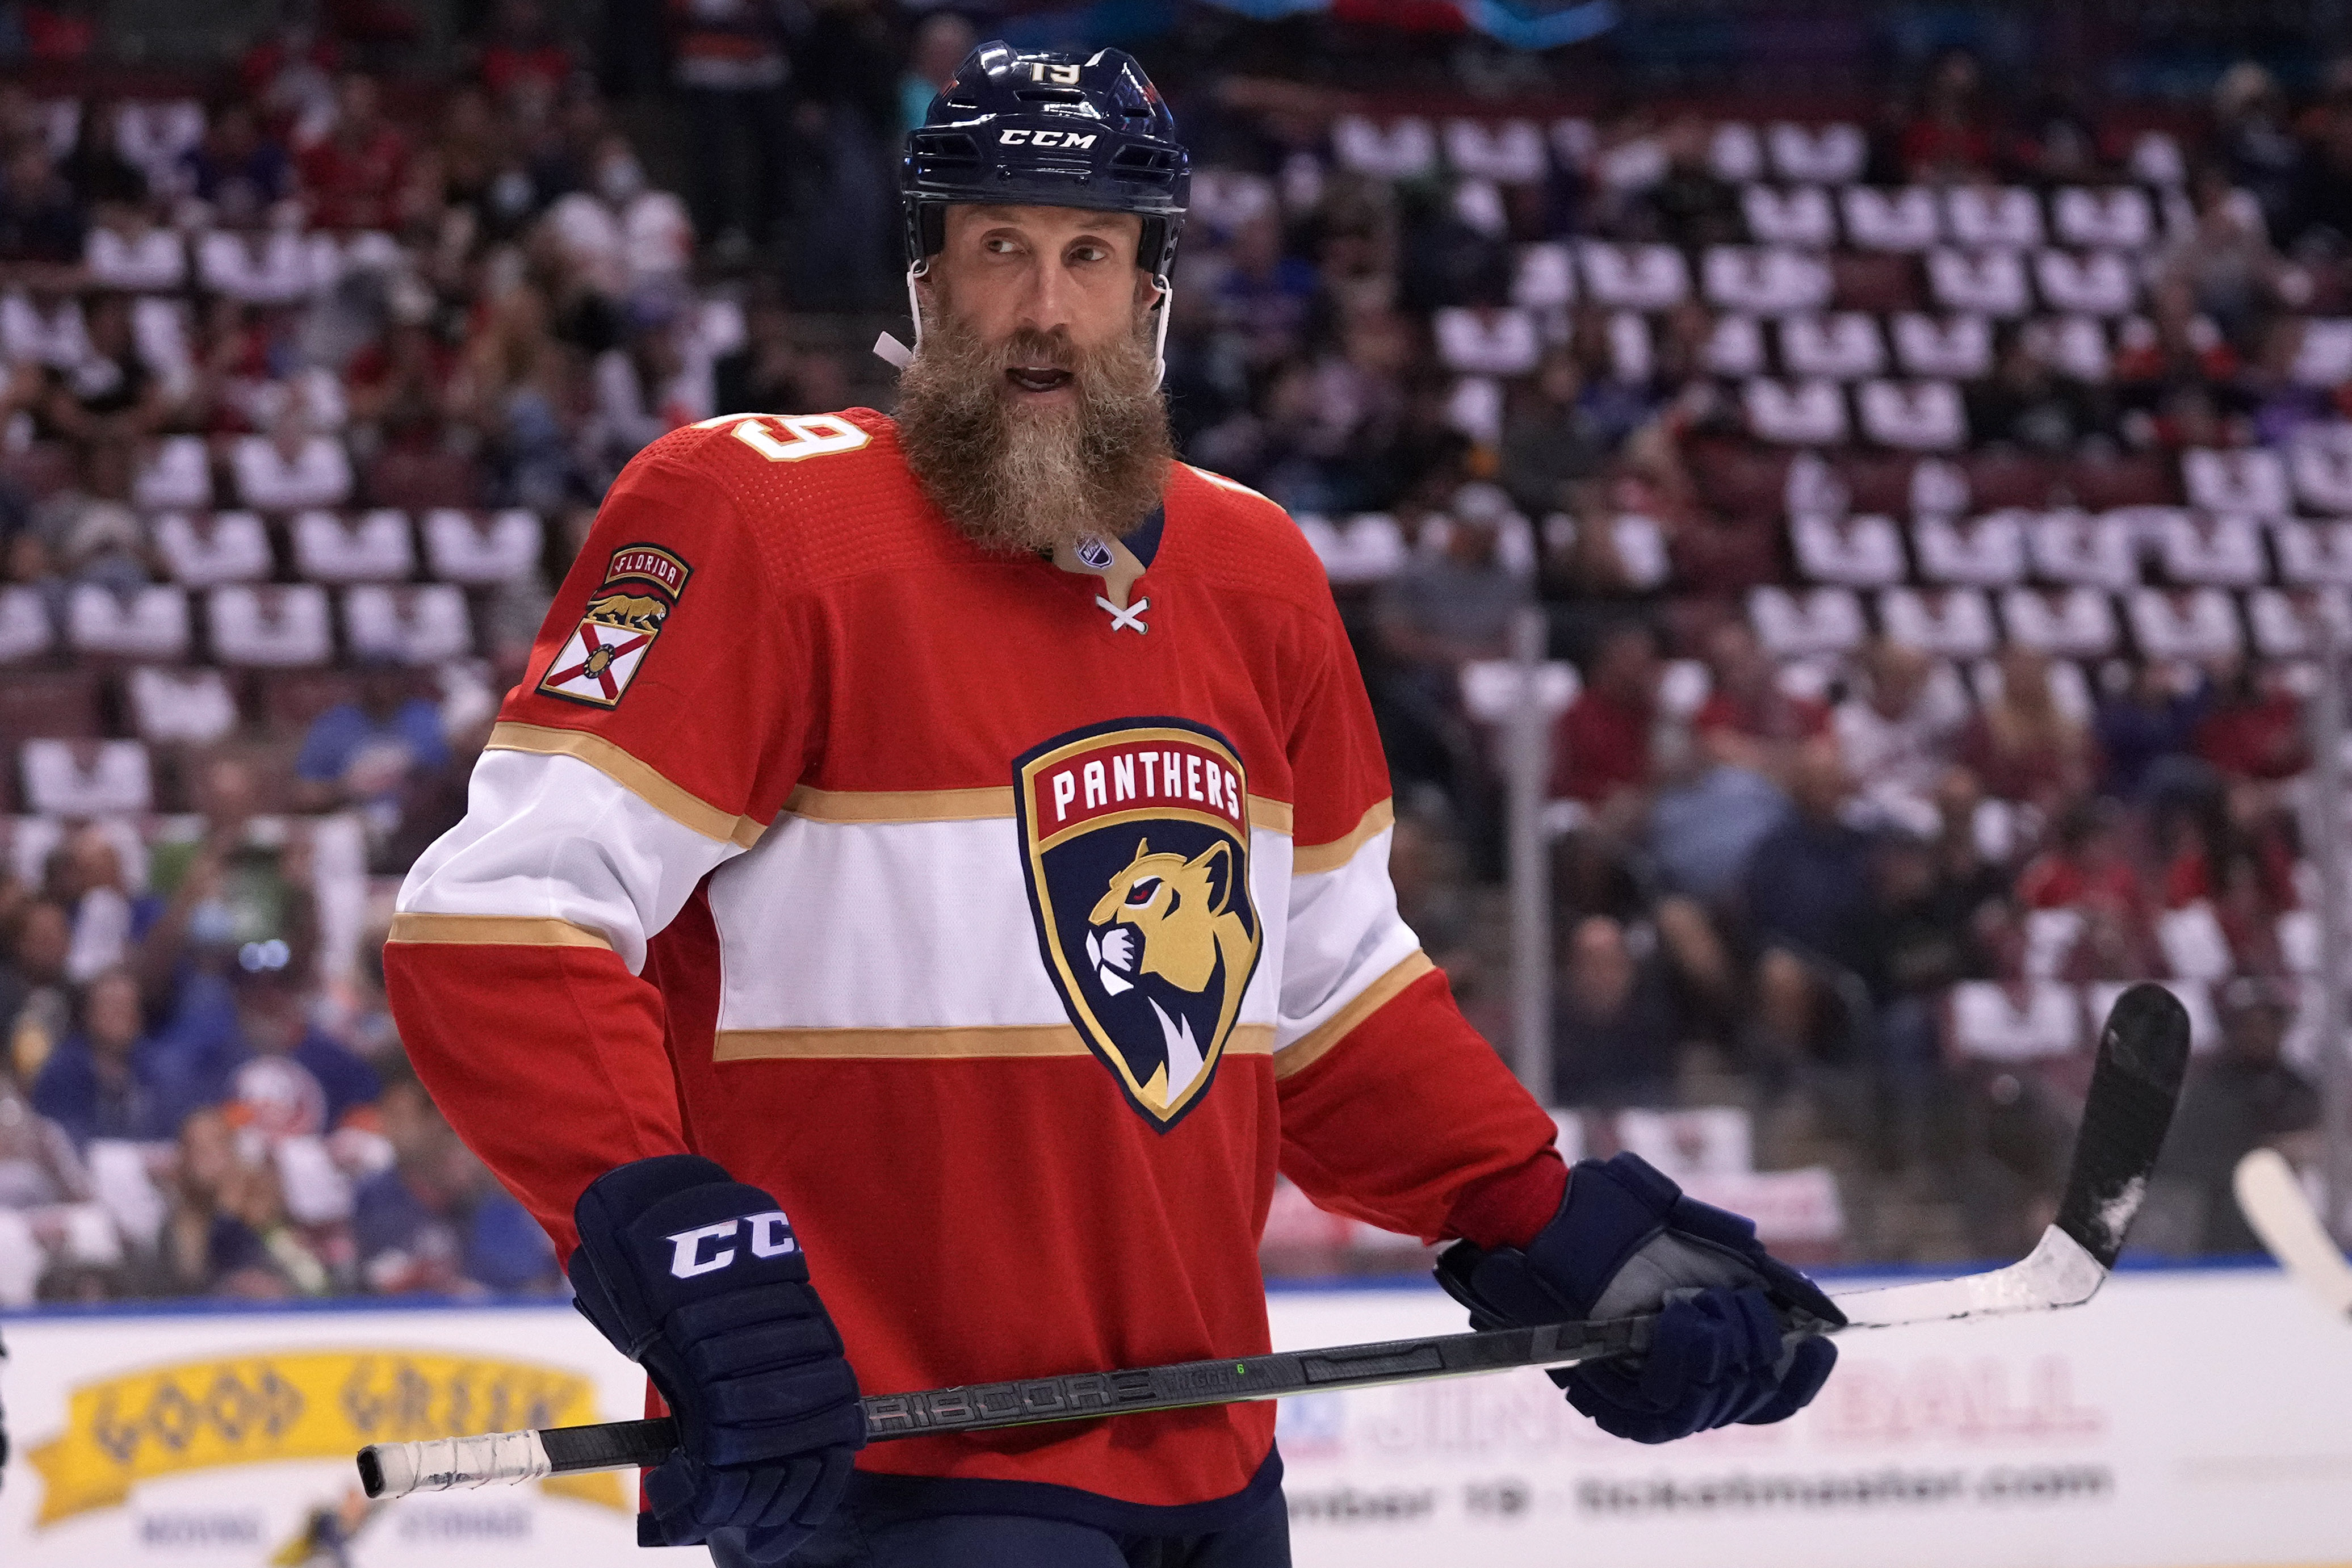 Oct 16, 2021; Sunrise, Florida, USA; Florida Panthers center Joe Thornton (19) skates on the ice during the first period against the New York Islanders at FLA Live Arena.